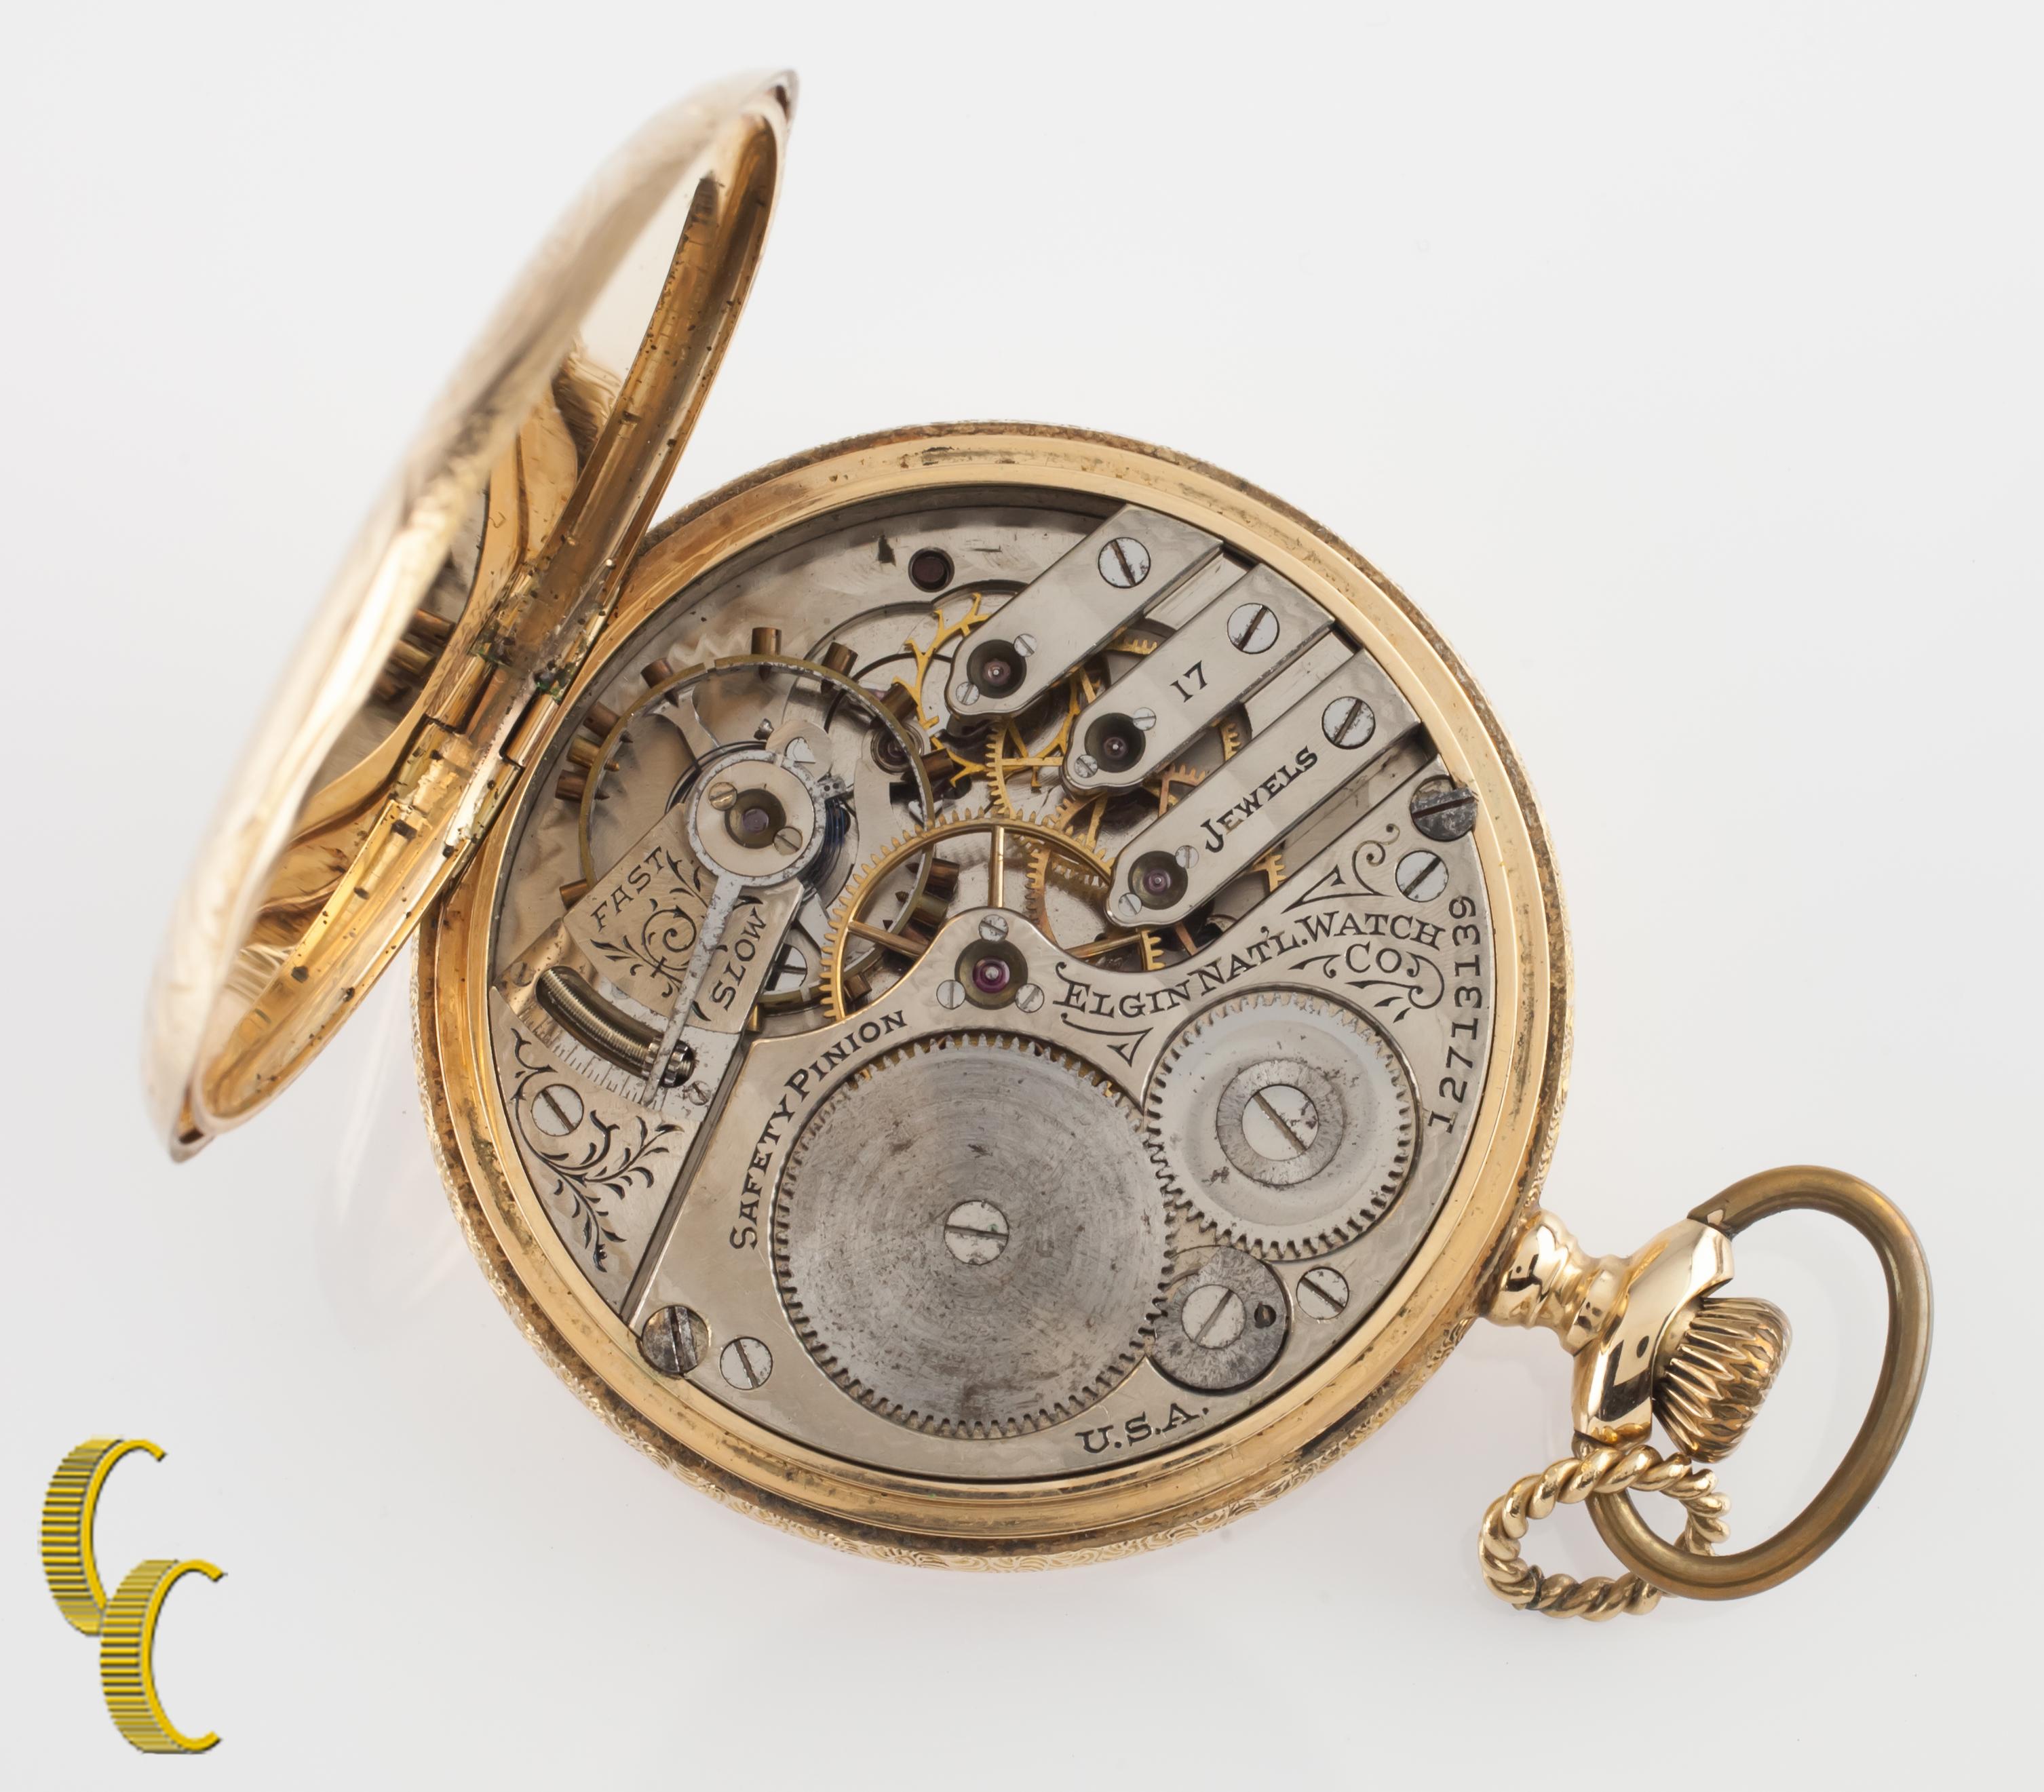 Beautiful Antique Elgin Pocket Watch w/ White Dial Including Blue Hands & Dedicated Second Dial
14K Yellow Gold Case w/ Intricate Hand-Etched Design on Case & Initials 